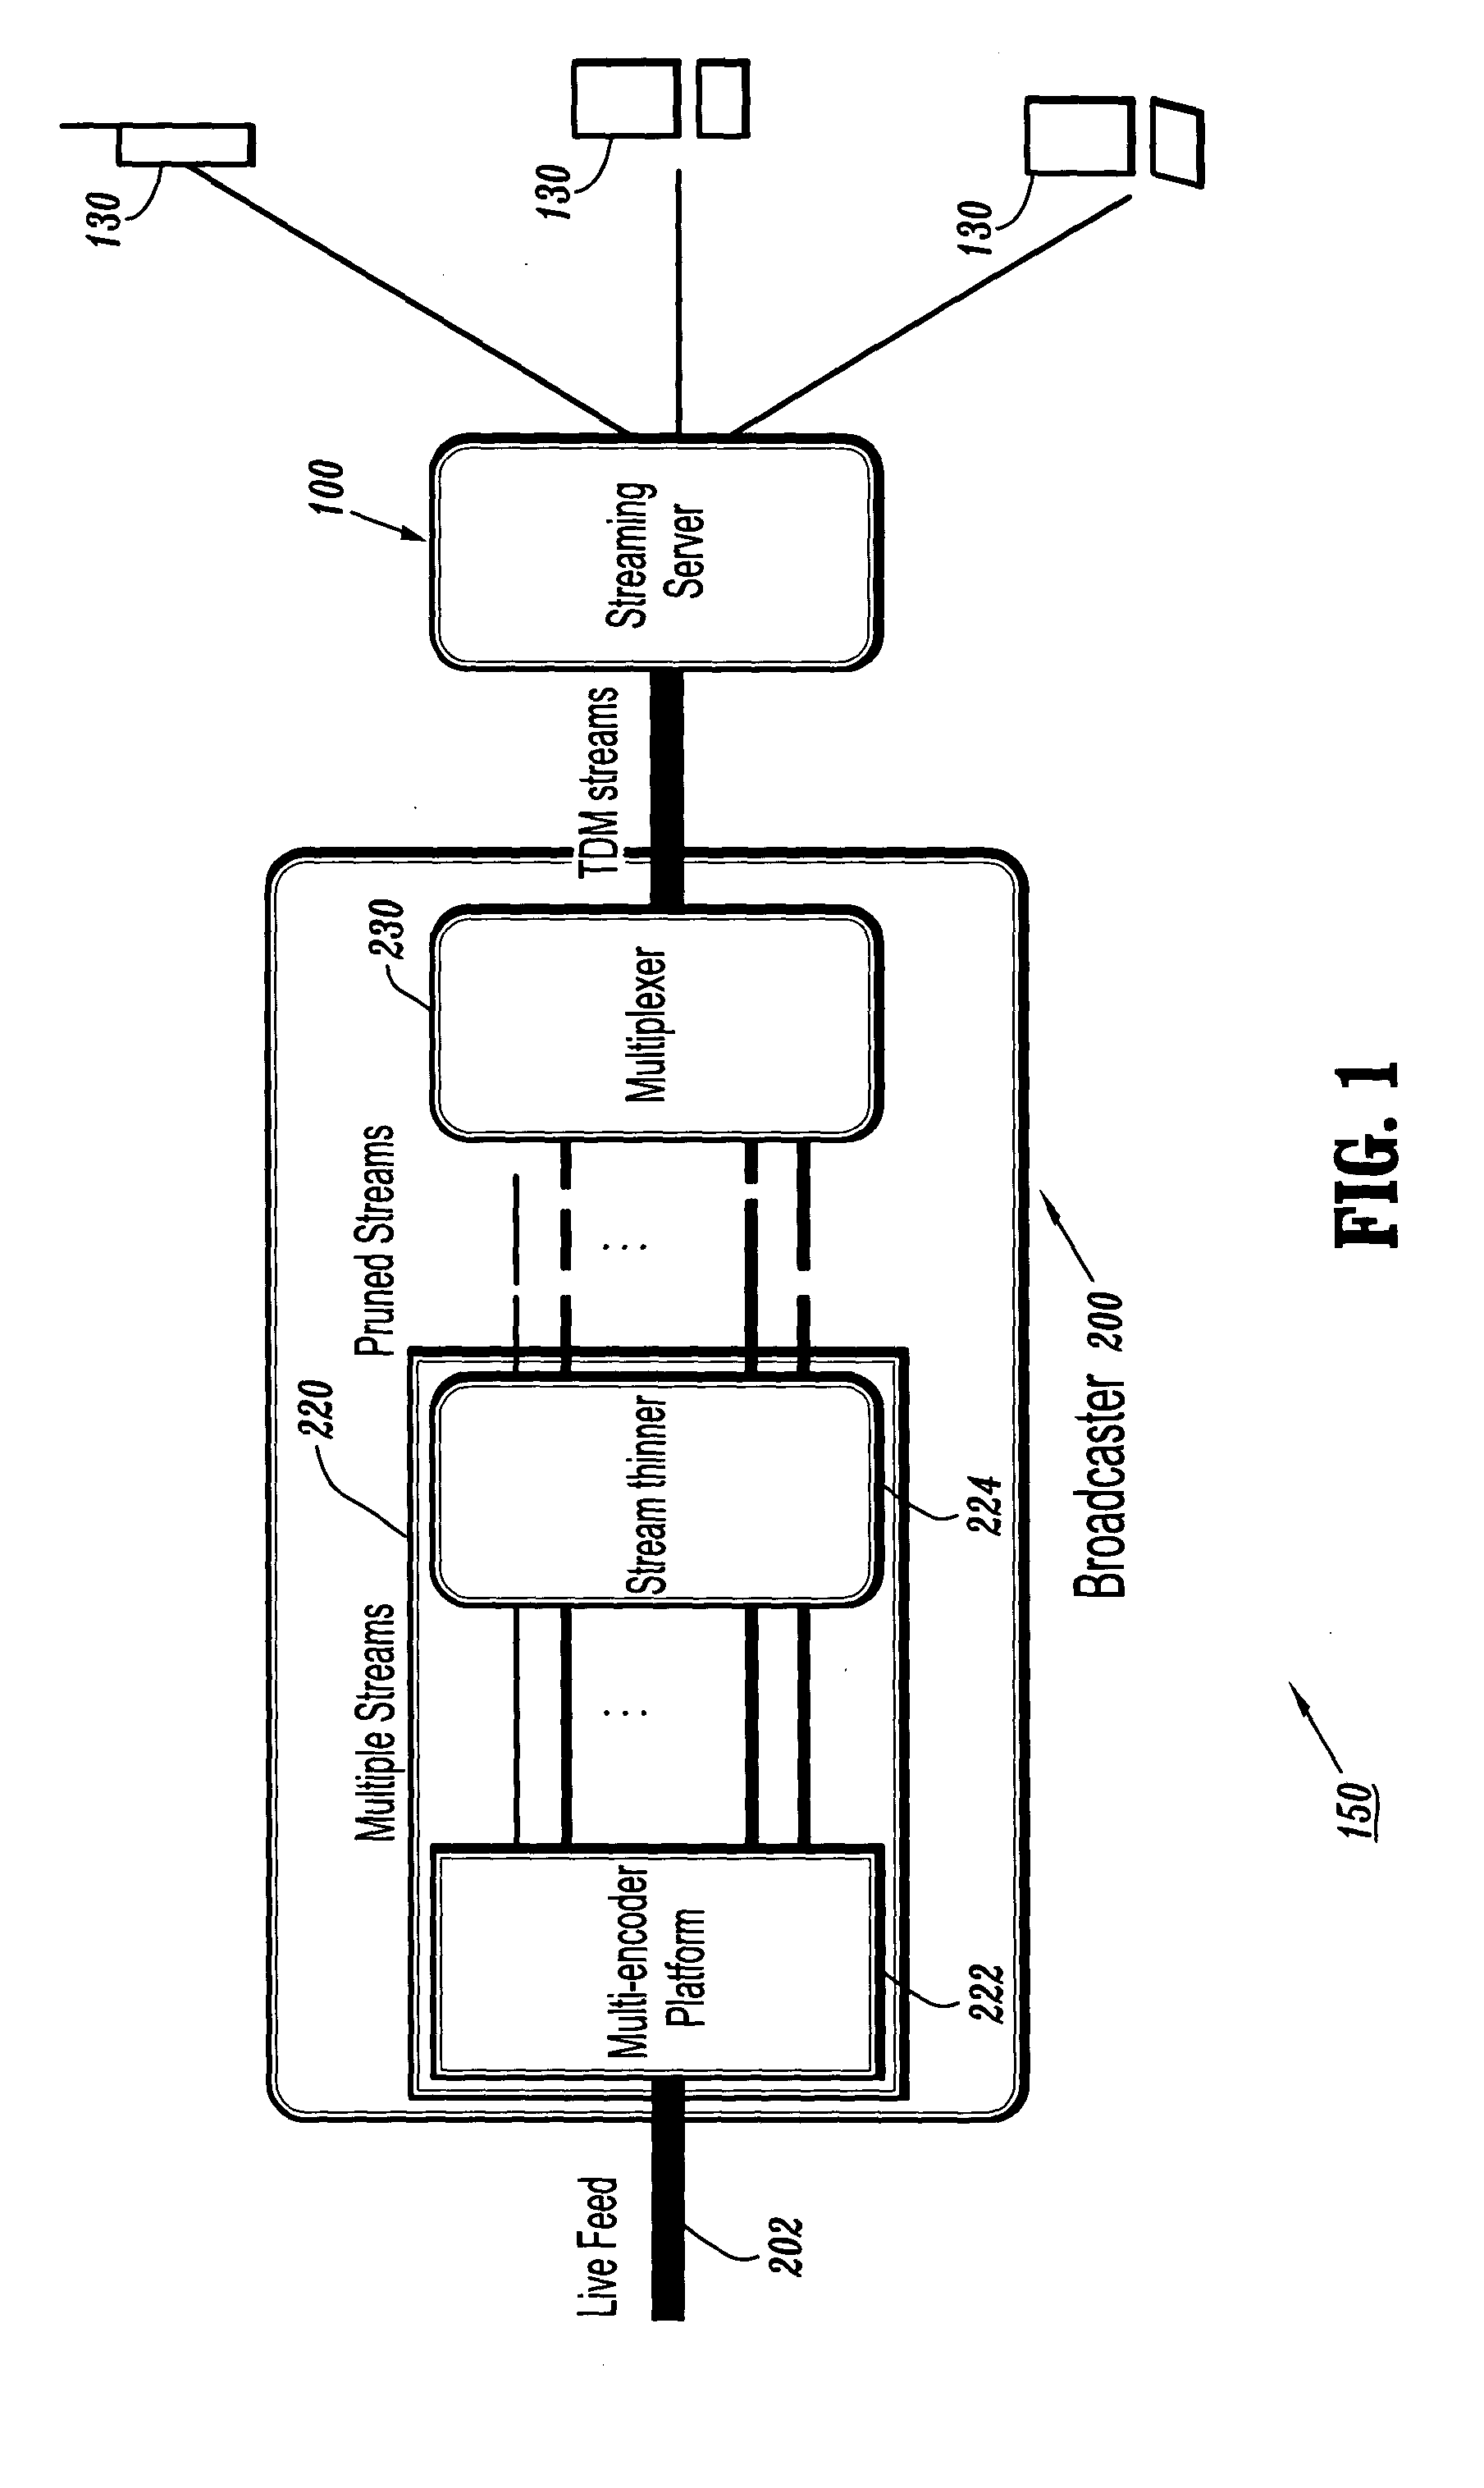 System and method for resource-efficient live media streaming to heterogeneous clients